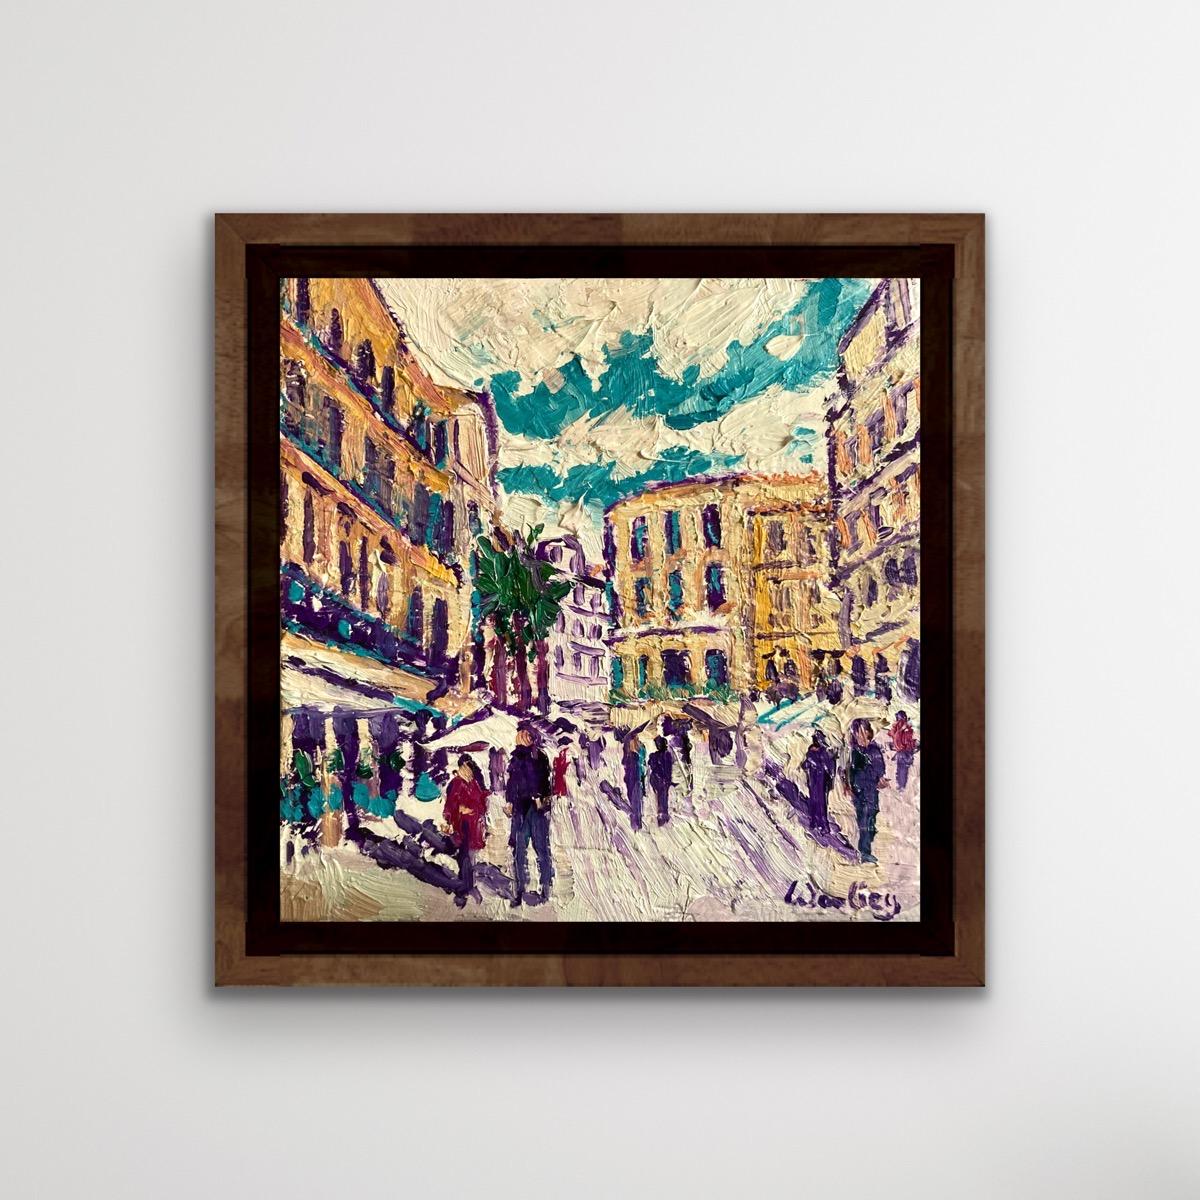 Malaga Shadows is an Original Painting by Eleanor Woolley. Started Plein Air and finished in the Artist's studio this painting is of Malaga's Old City. It is Very early spring, the sun is enhancing the lovely yellow coloured stone of the historic